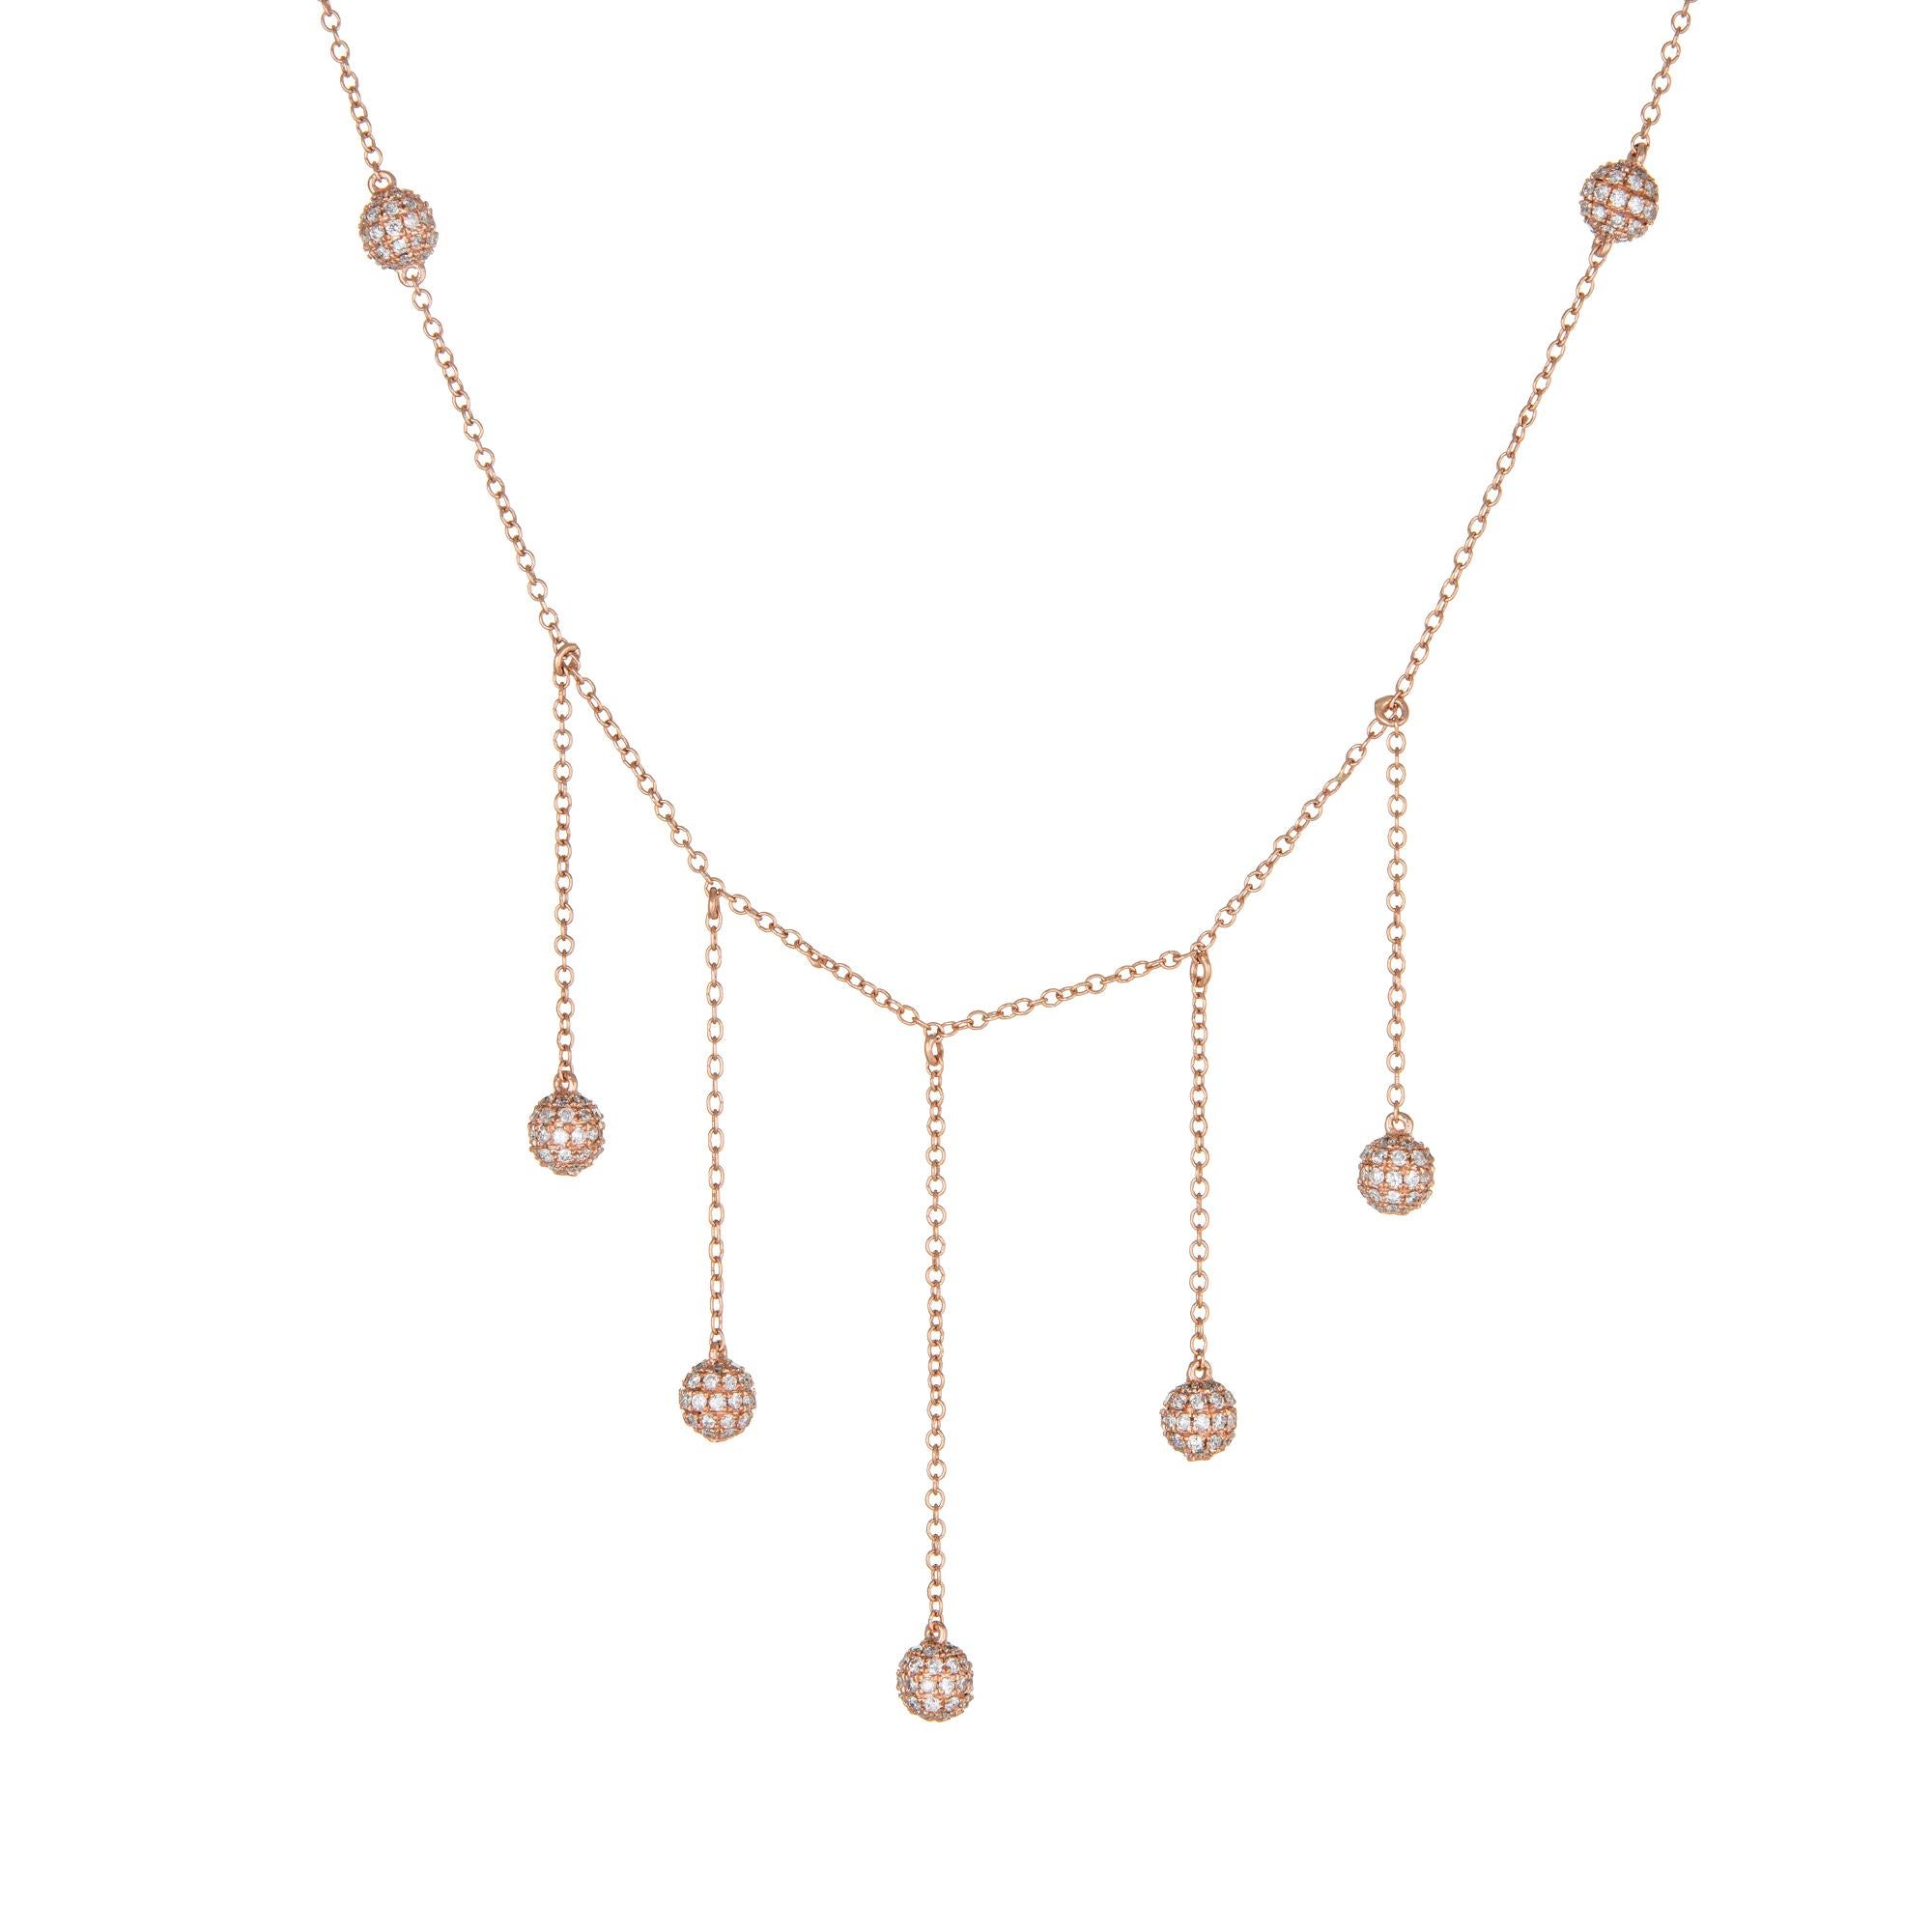 rose gold pave necklace